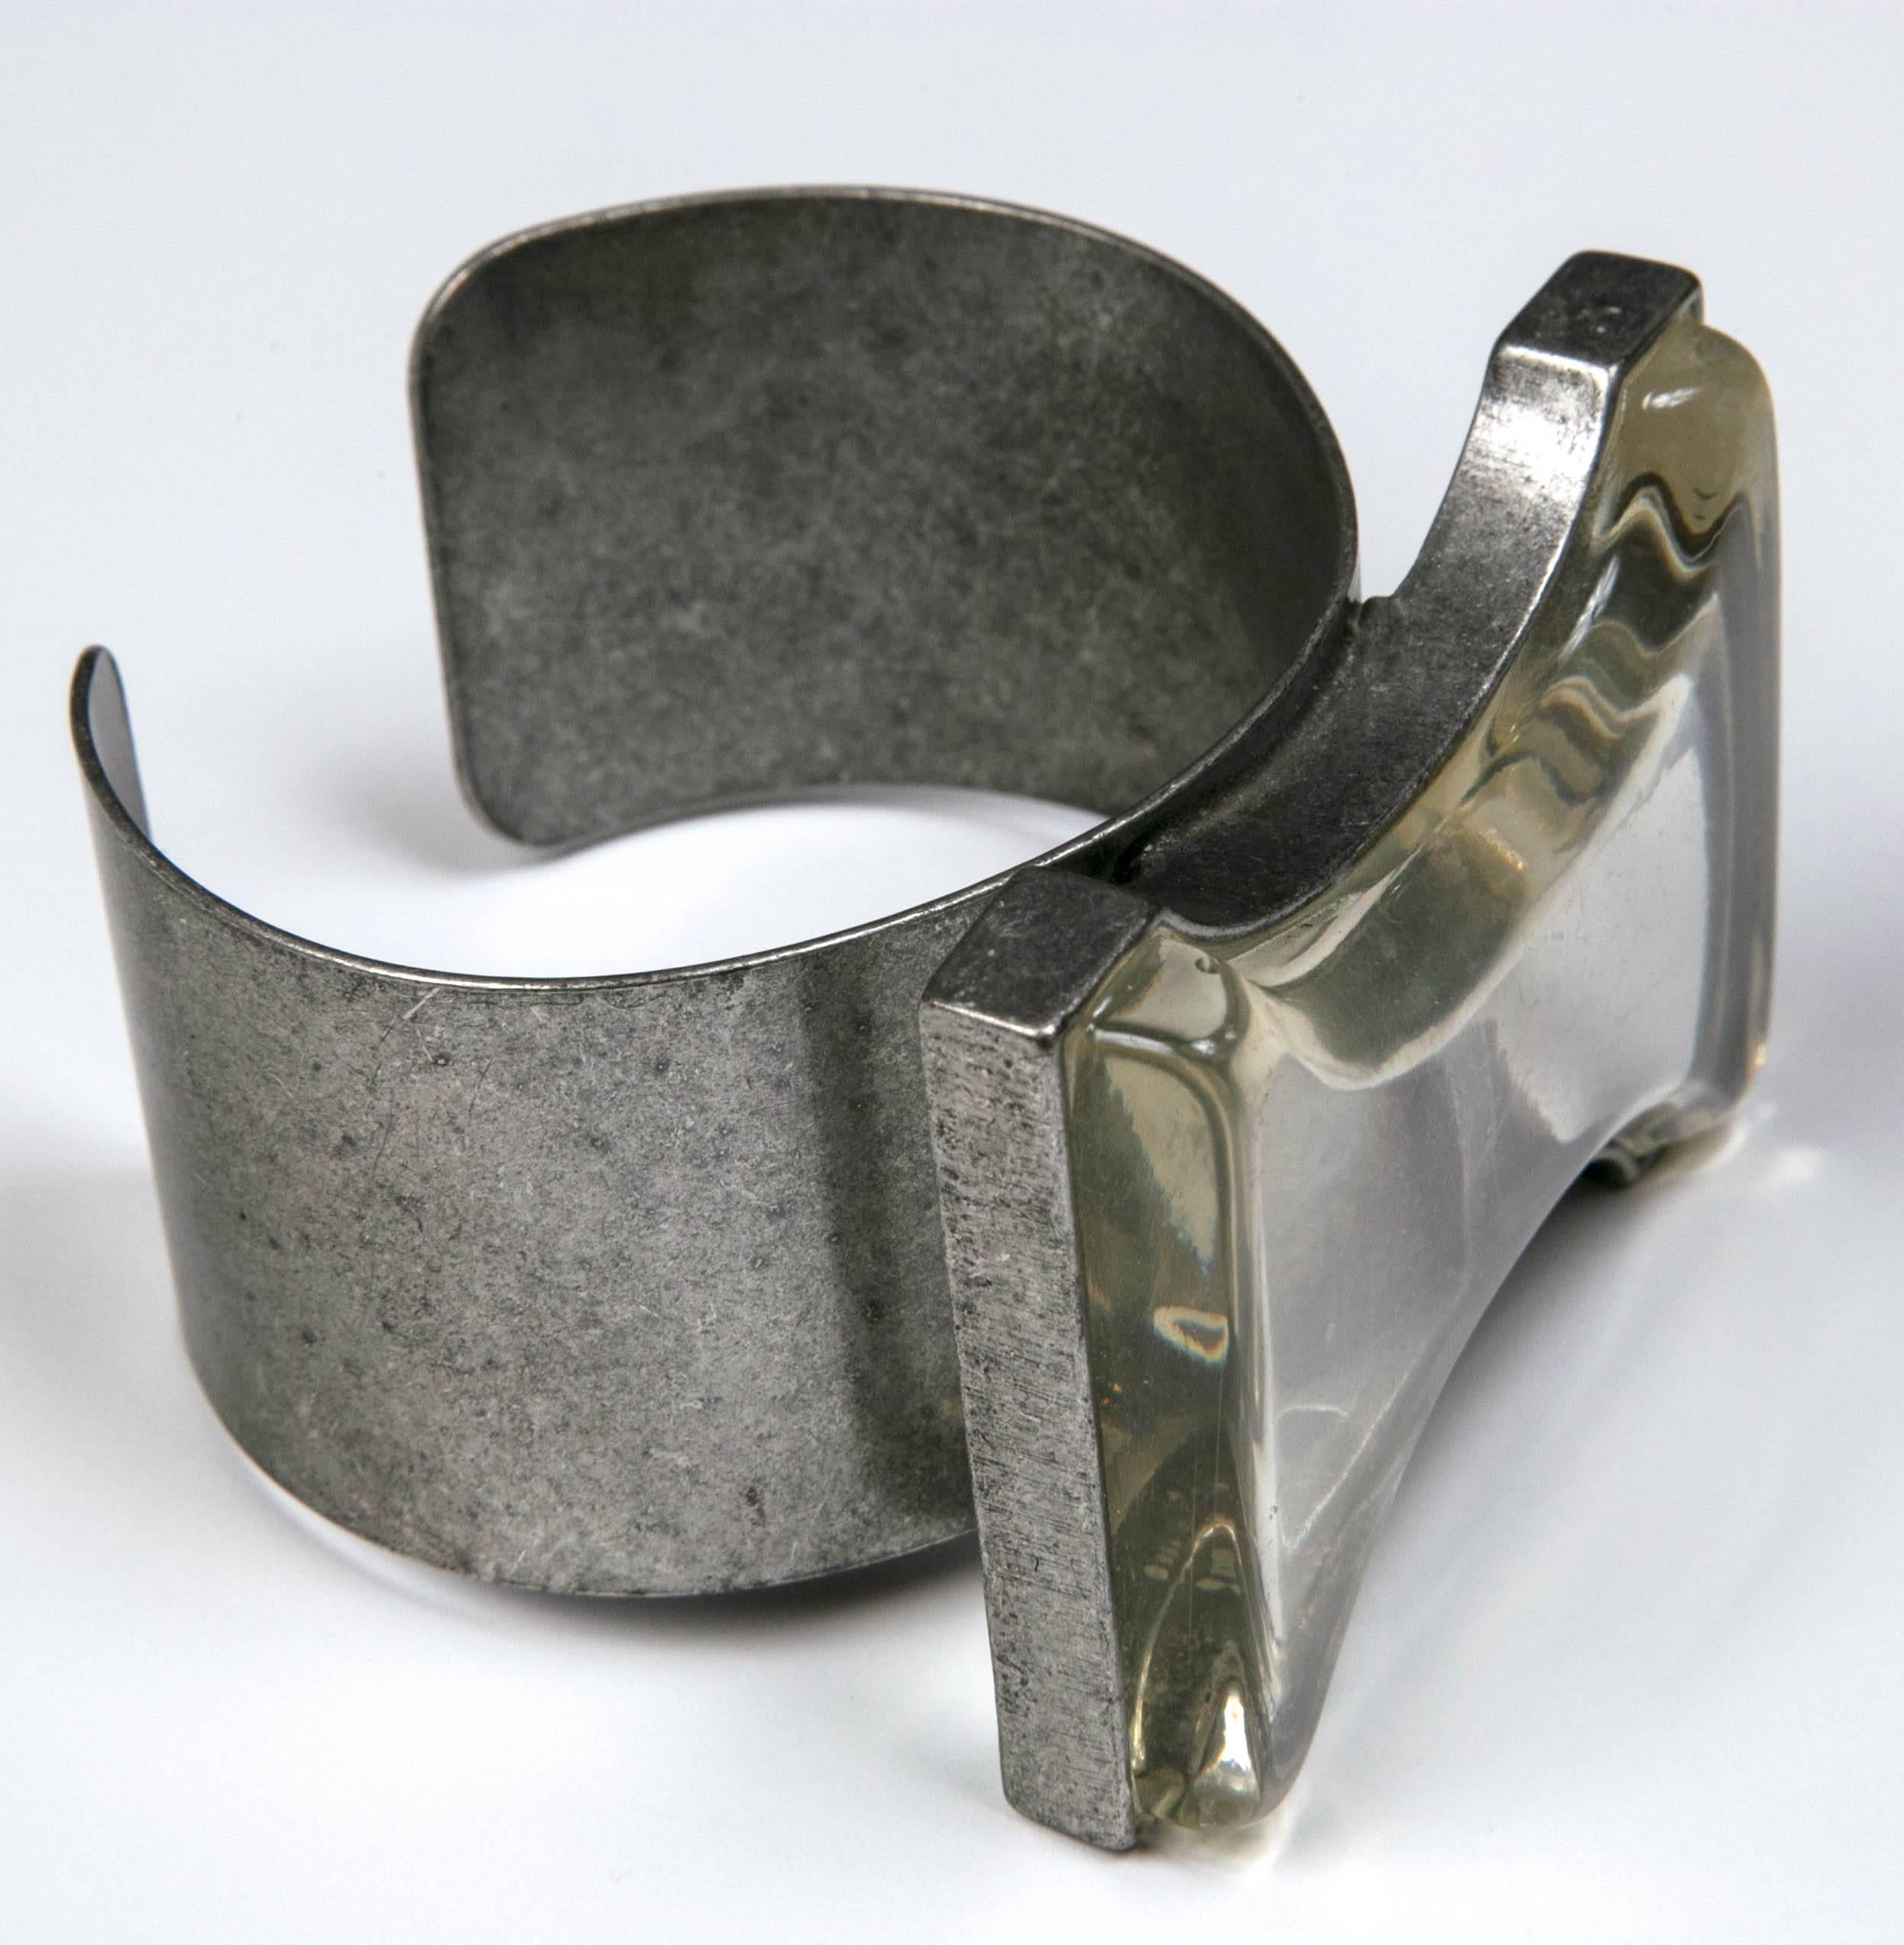 Limited edition statement cuff features a hefty chunk of lucite on matte silver surround. From the 1970's artisan era in San Francisco. Brilliantly designed and tapered so it's comfortable on the wrist.